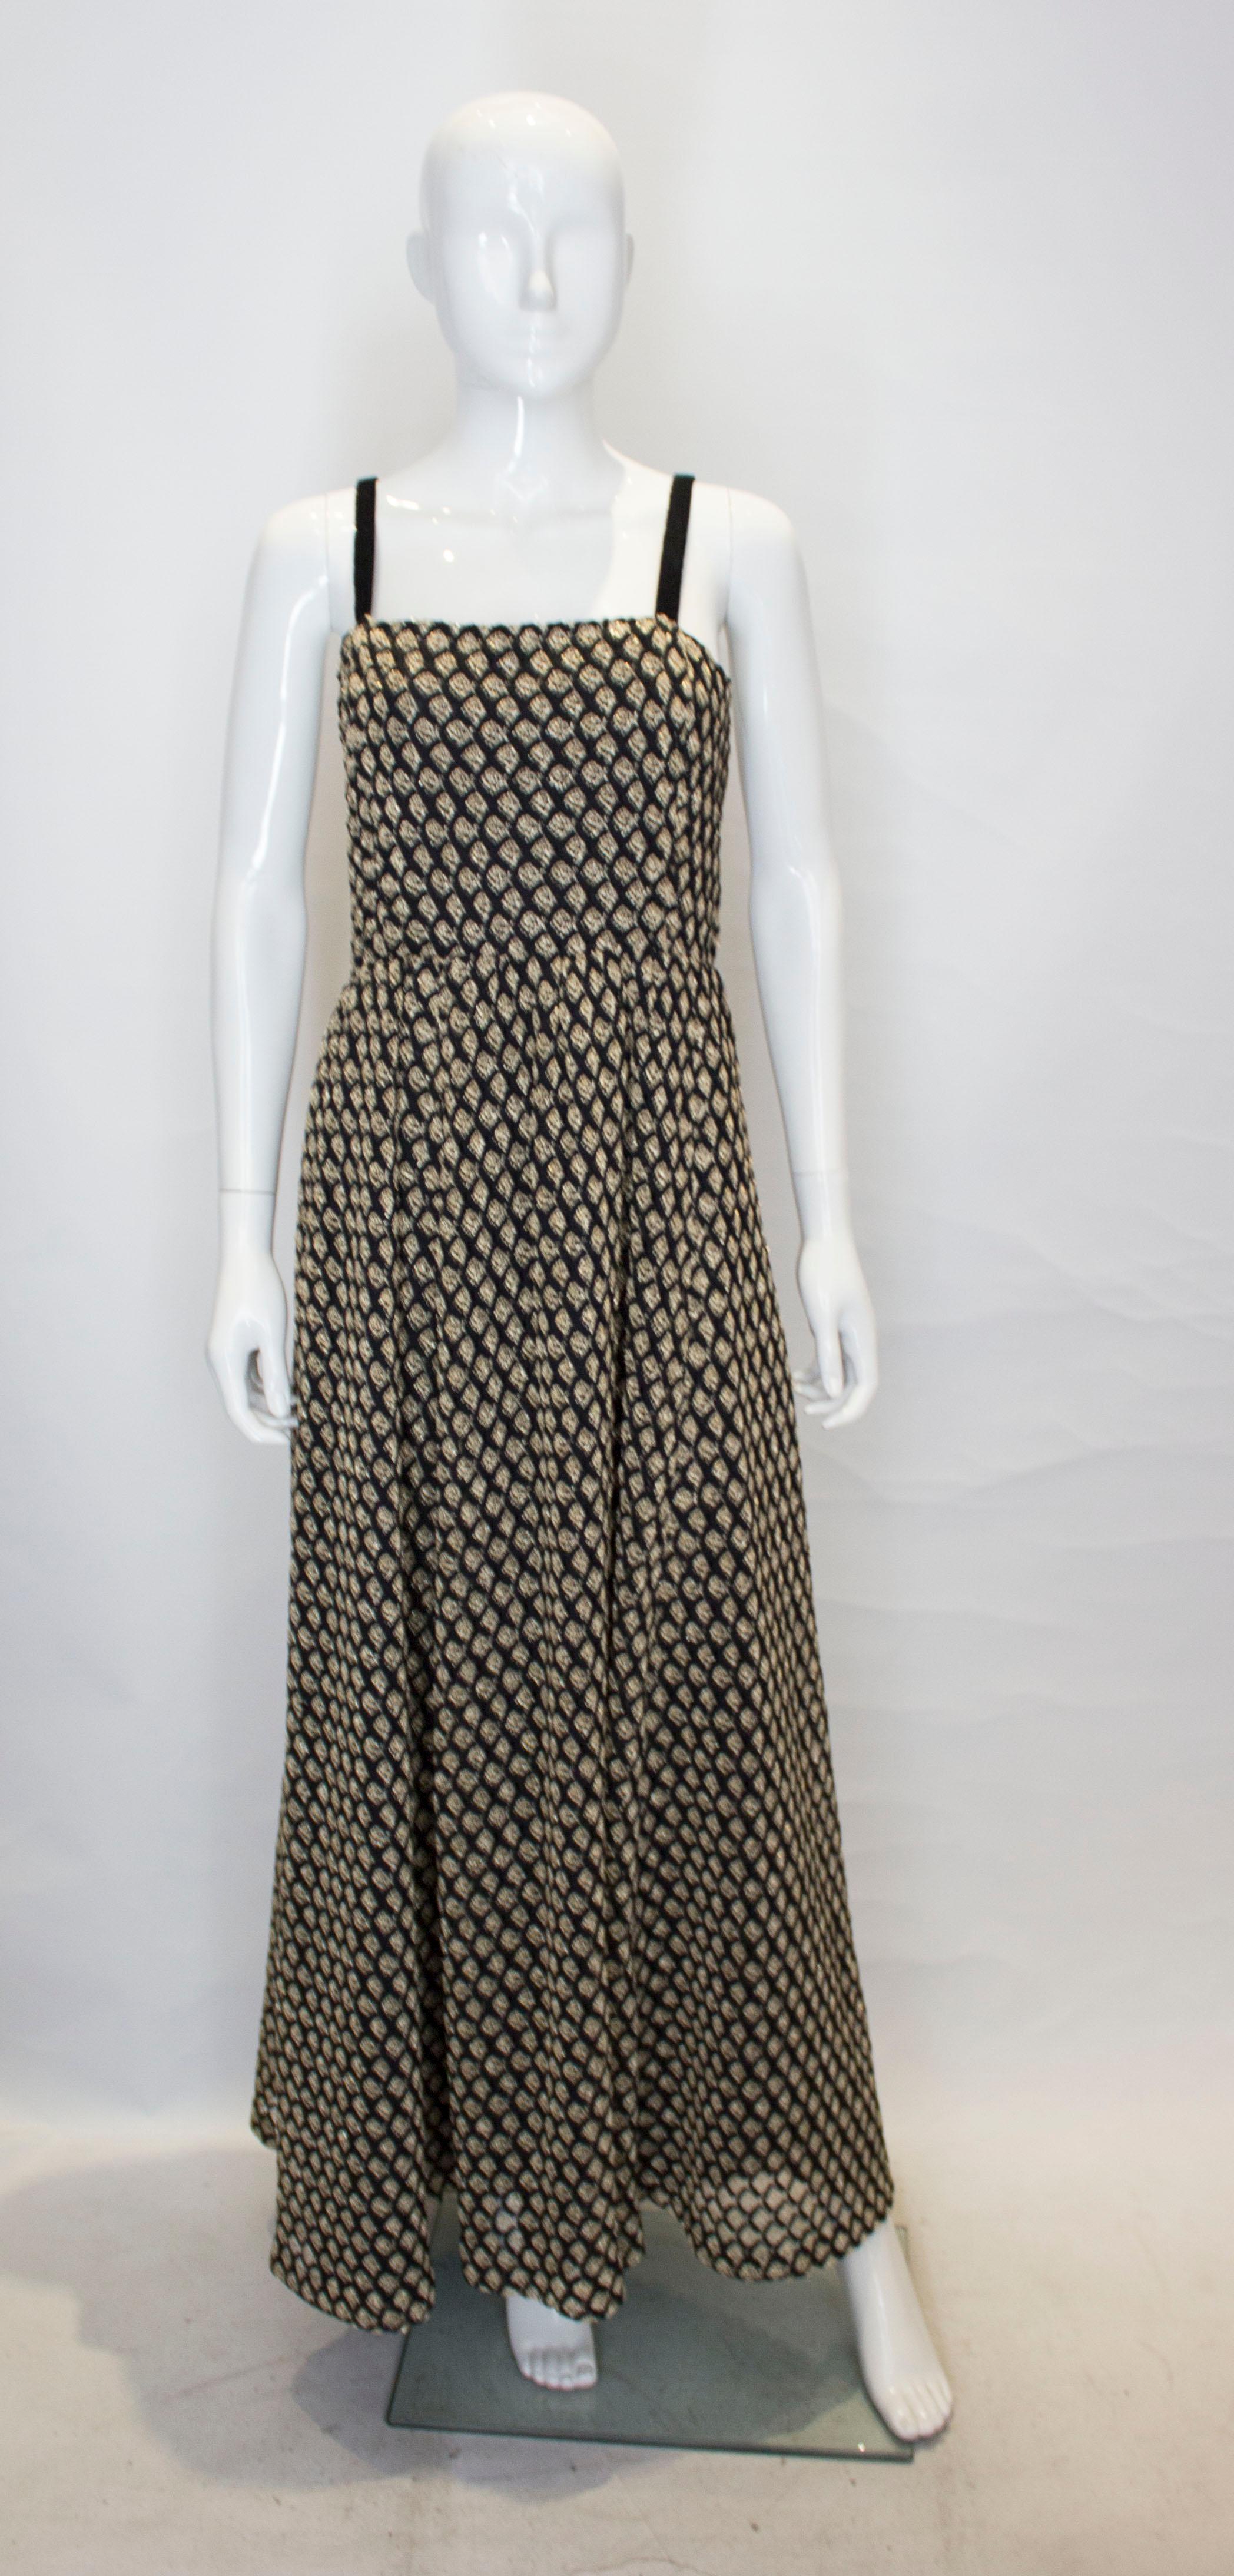  A chic headturning dress in black and gold.  The dress is in a black and gold mesh like fabric with  a black lining. It has black velvet shoulder straps and has gathering at the waist.